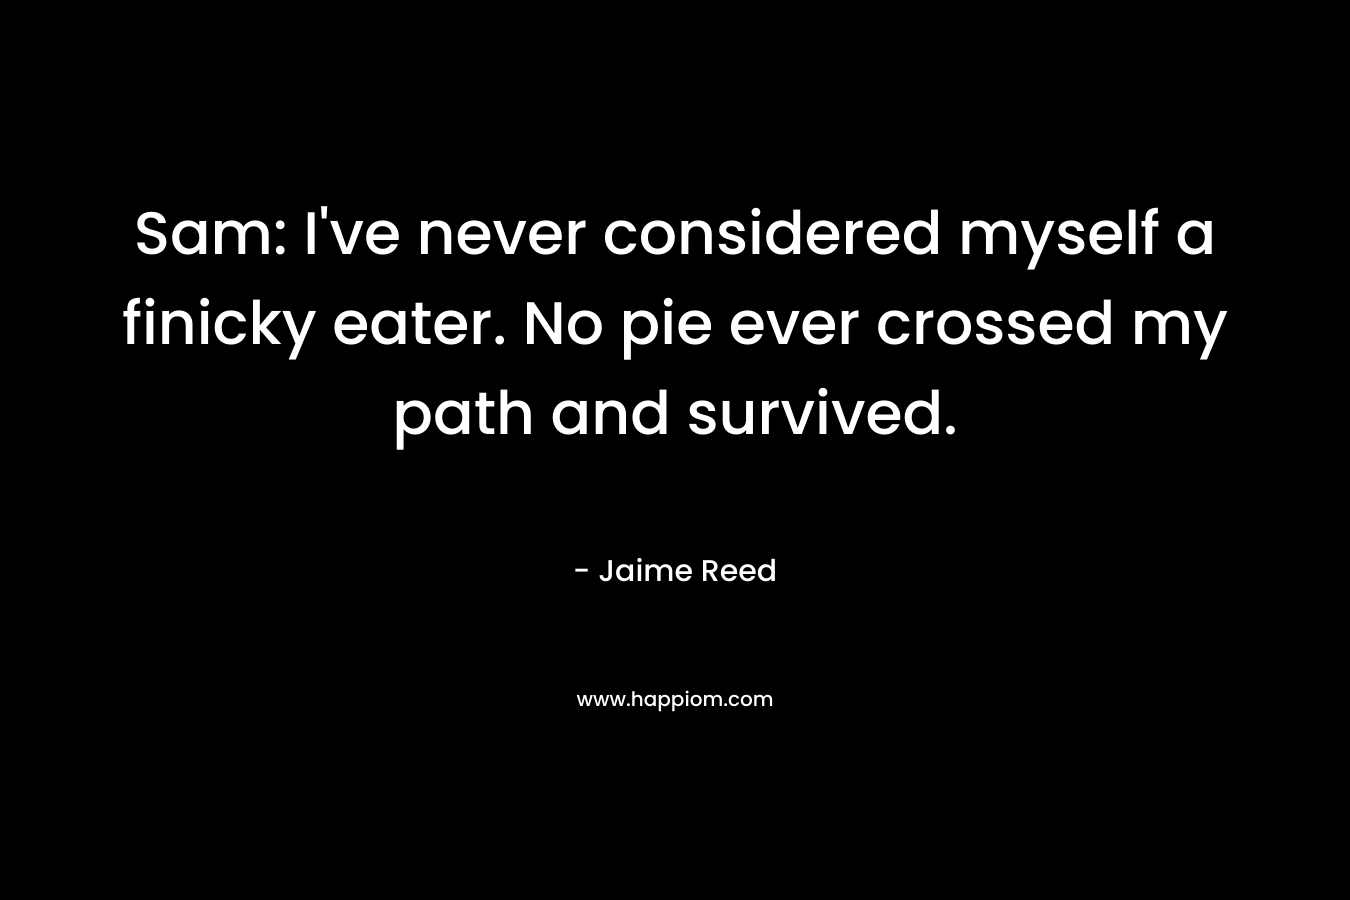 Sam: I've never considered myself a finicky eater. No pie ever crossed my path and survived.